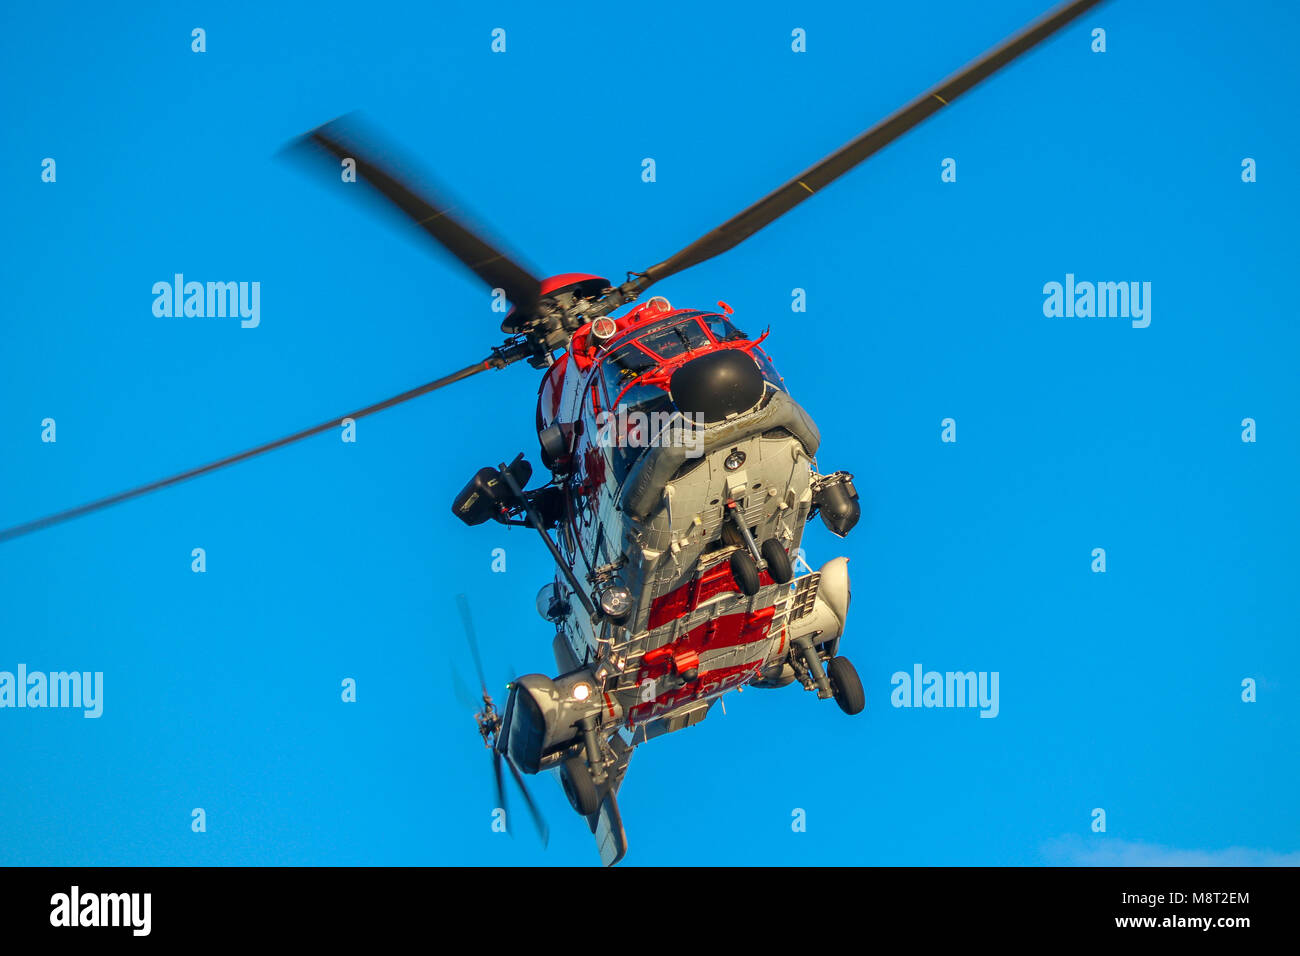 ALESUND, NORWAY - OCTOBER 24th, 2017: Airbus AS332 Super Puma rescue  helicopter in air. Operated by CHC helikopter service in Norway Stock Photo  - Alamy